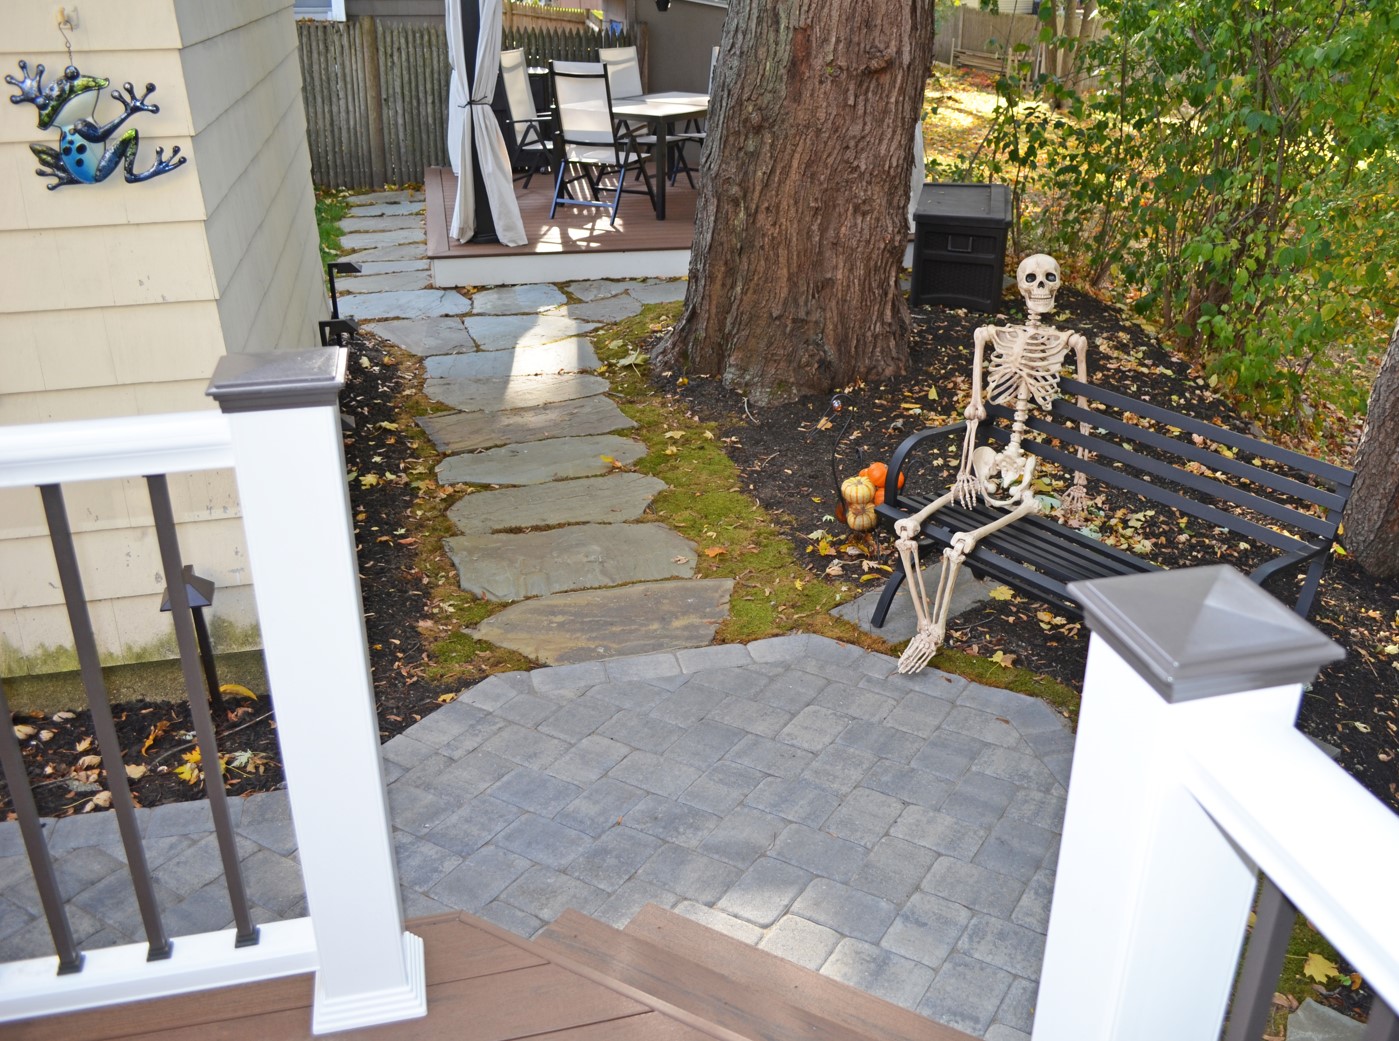 Don’t Wait Too Long – Move Ahead With Outdoor Living Plans.